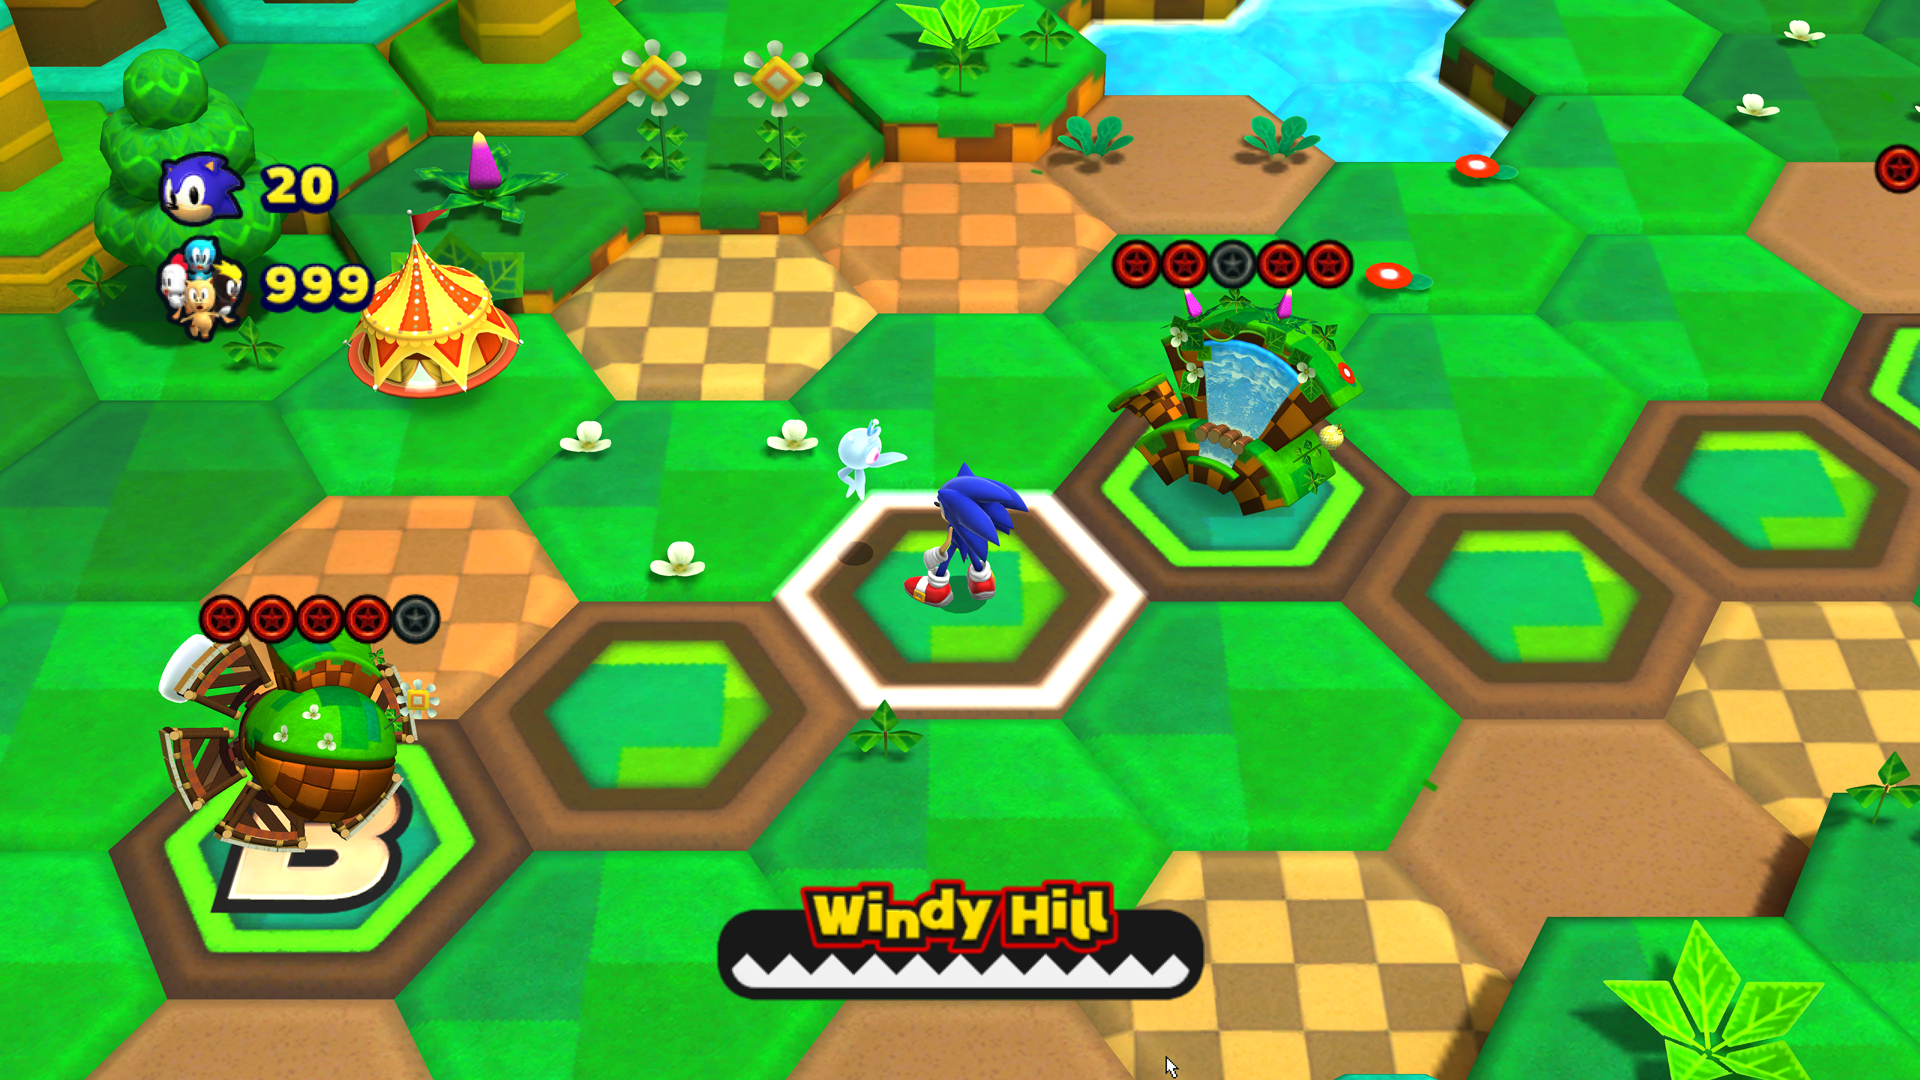 New Sonic Lost World screens reveal Miiverse functions, game map, and more!  » SEGAbits - #1 Source for SEGA News